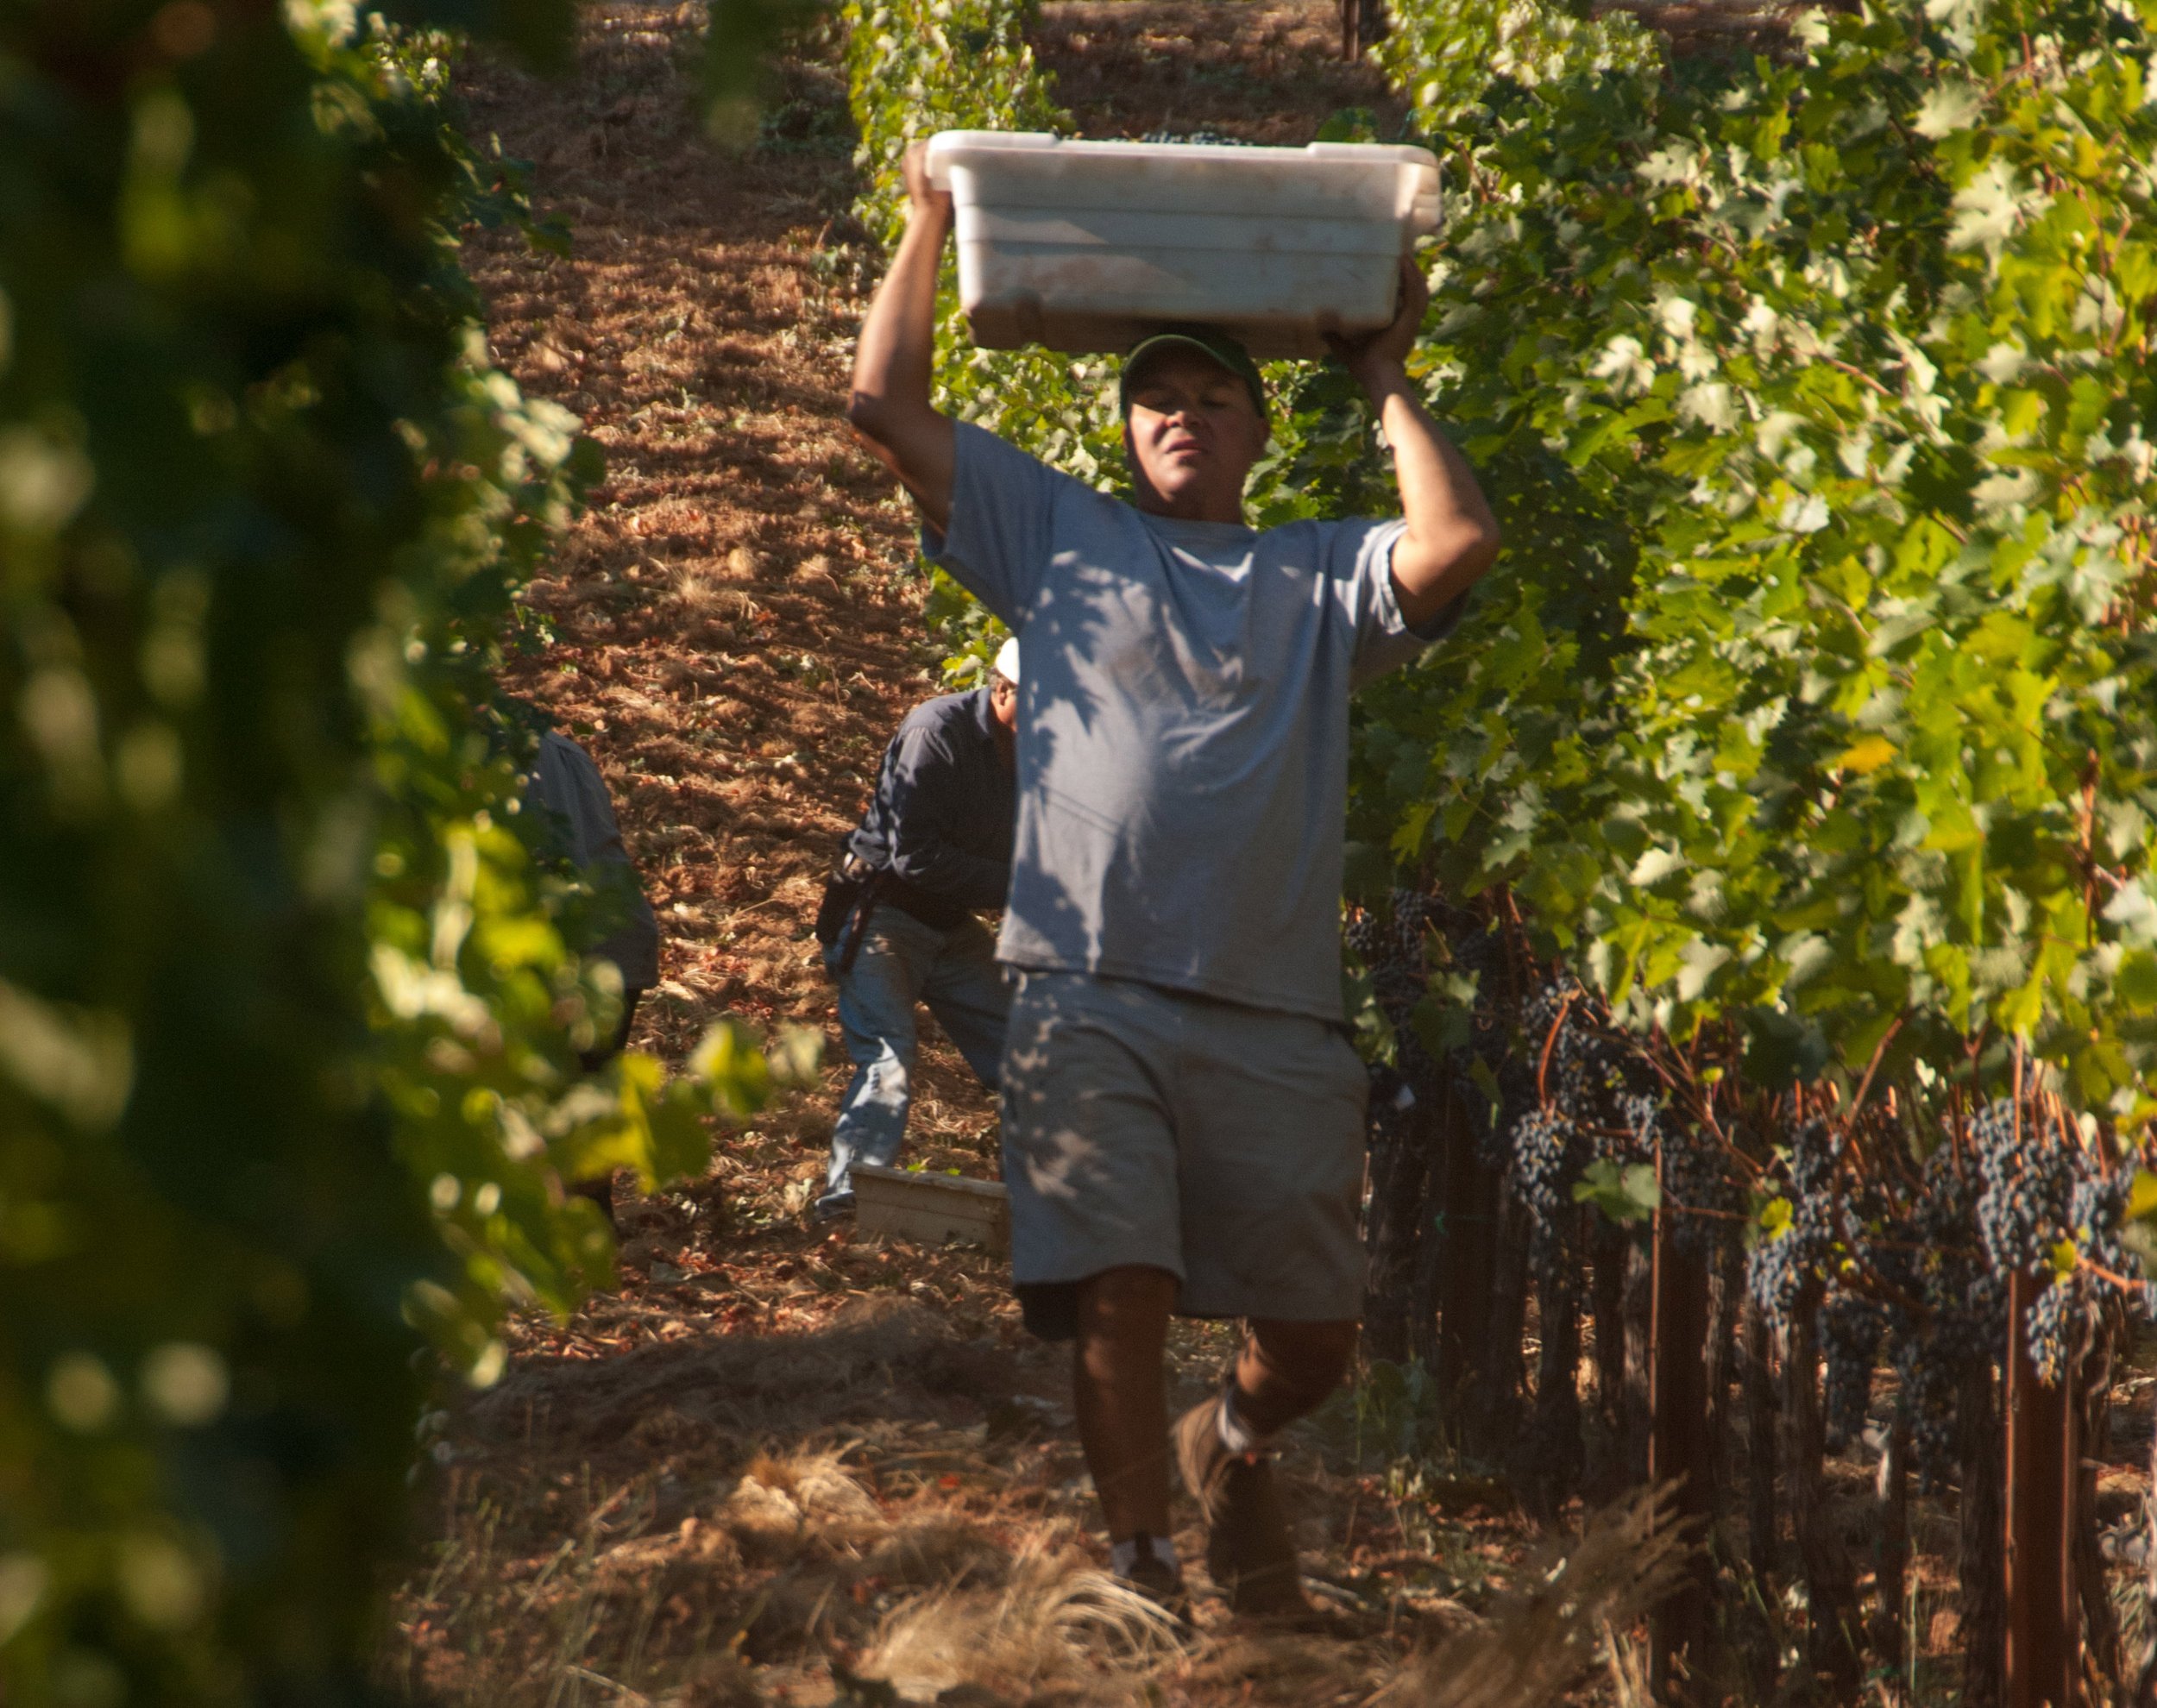 Vineyard worker carrying a container of picked grapes